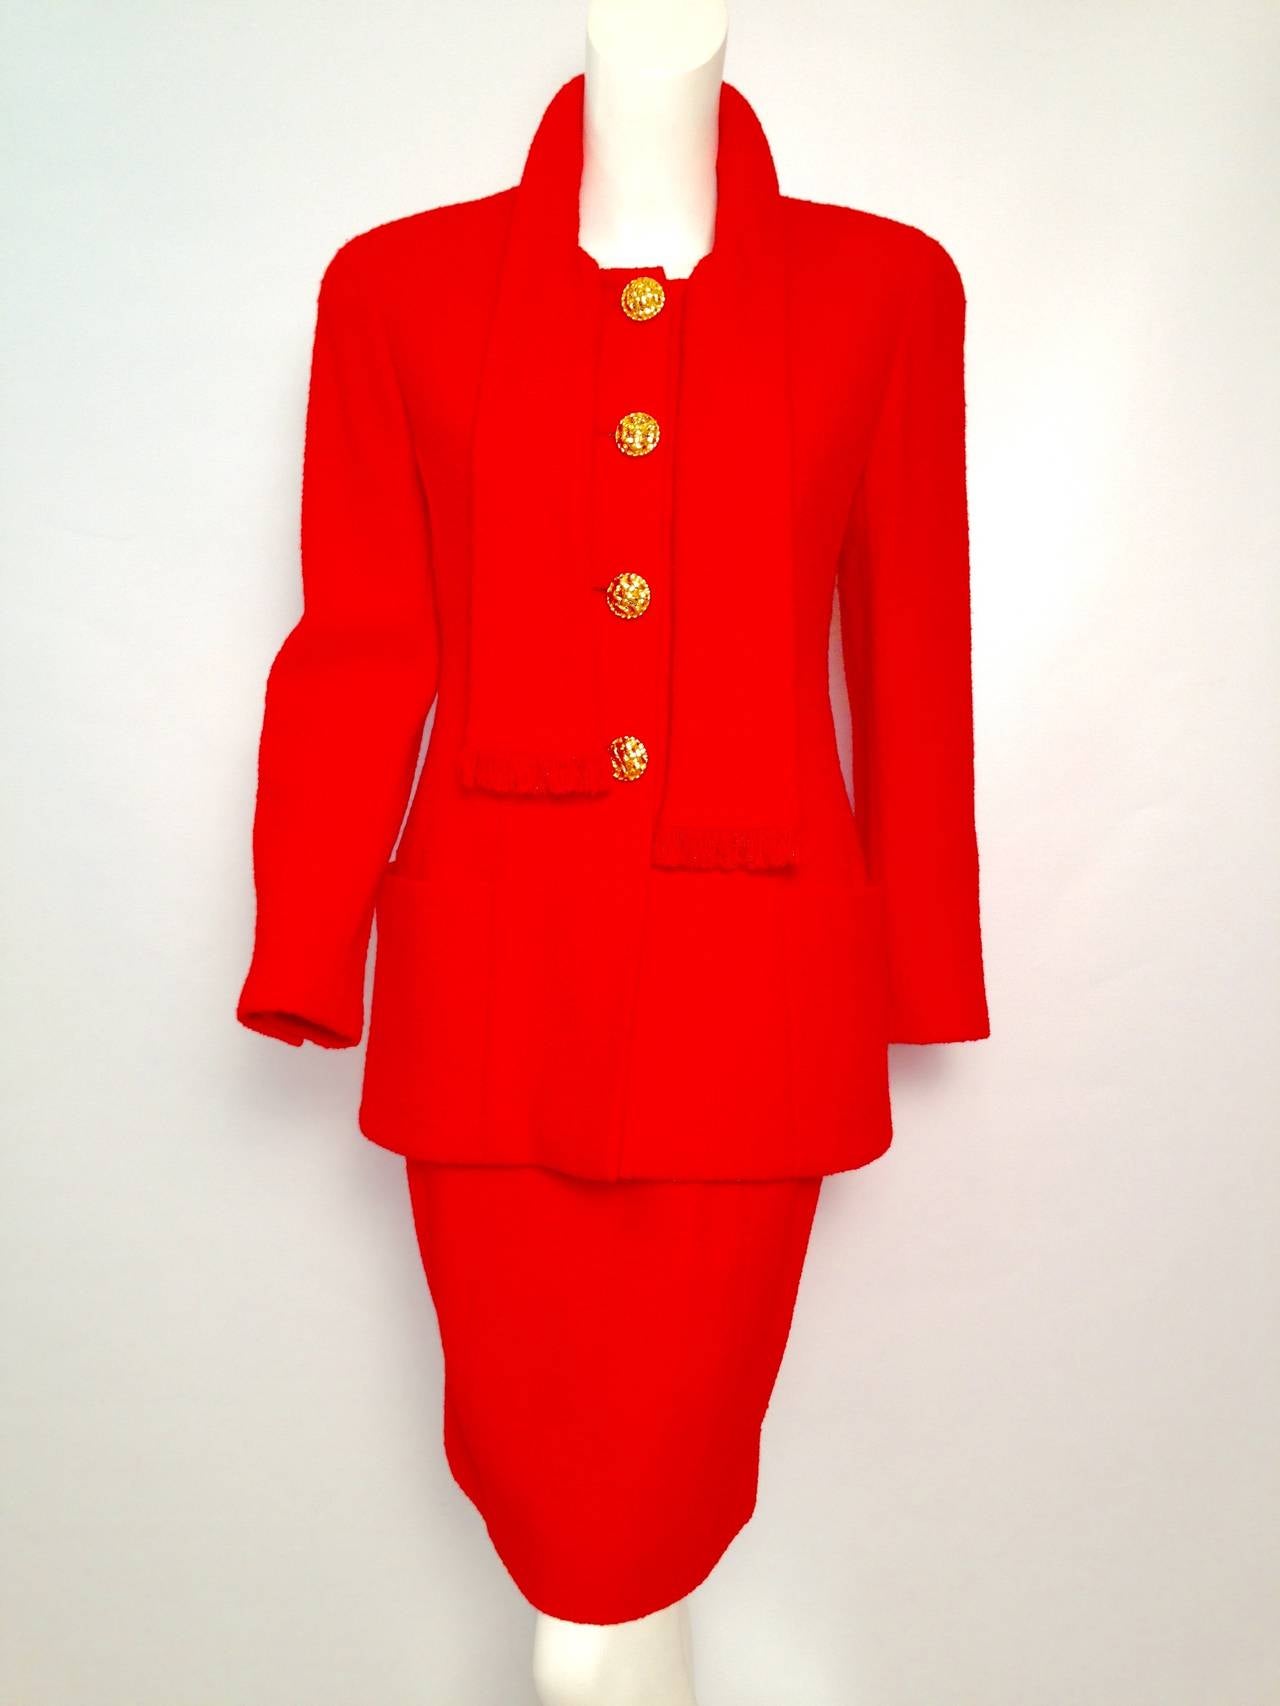 Rapturous Red Chanel Suit from 1989 by Karl Lagerfeld for Chanel celebrates Coco's 